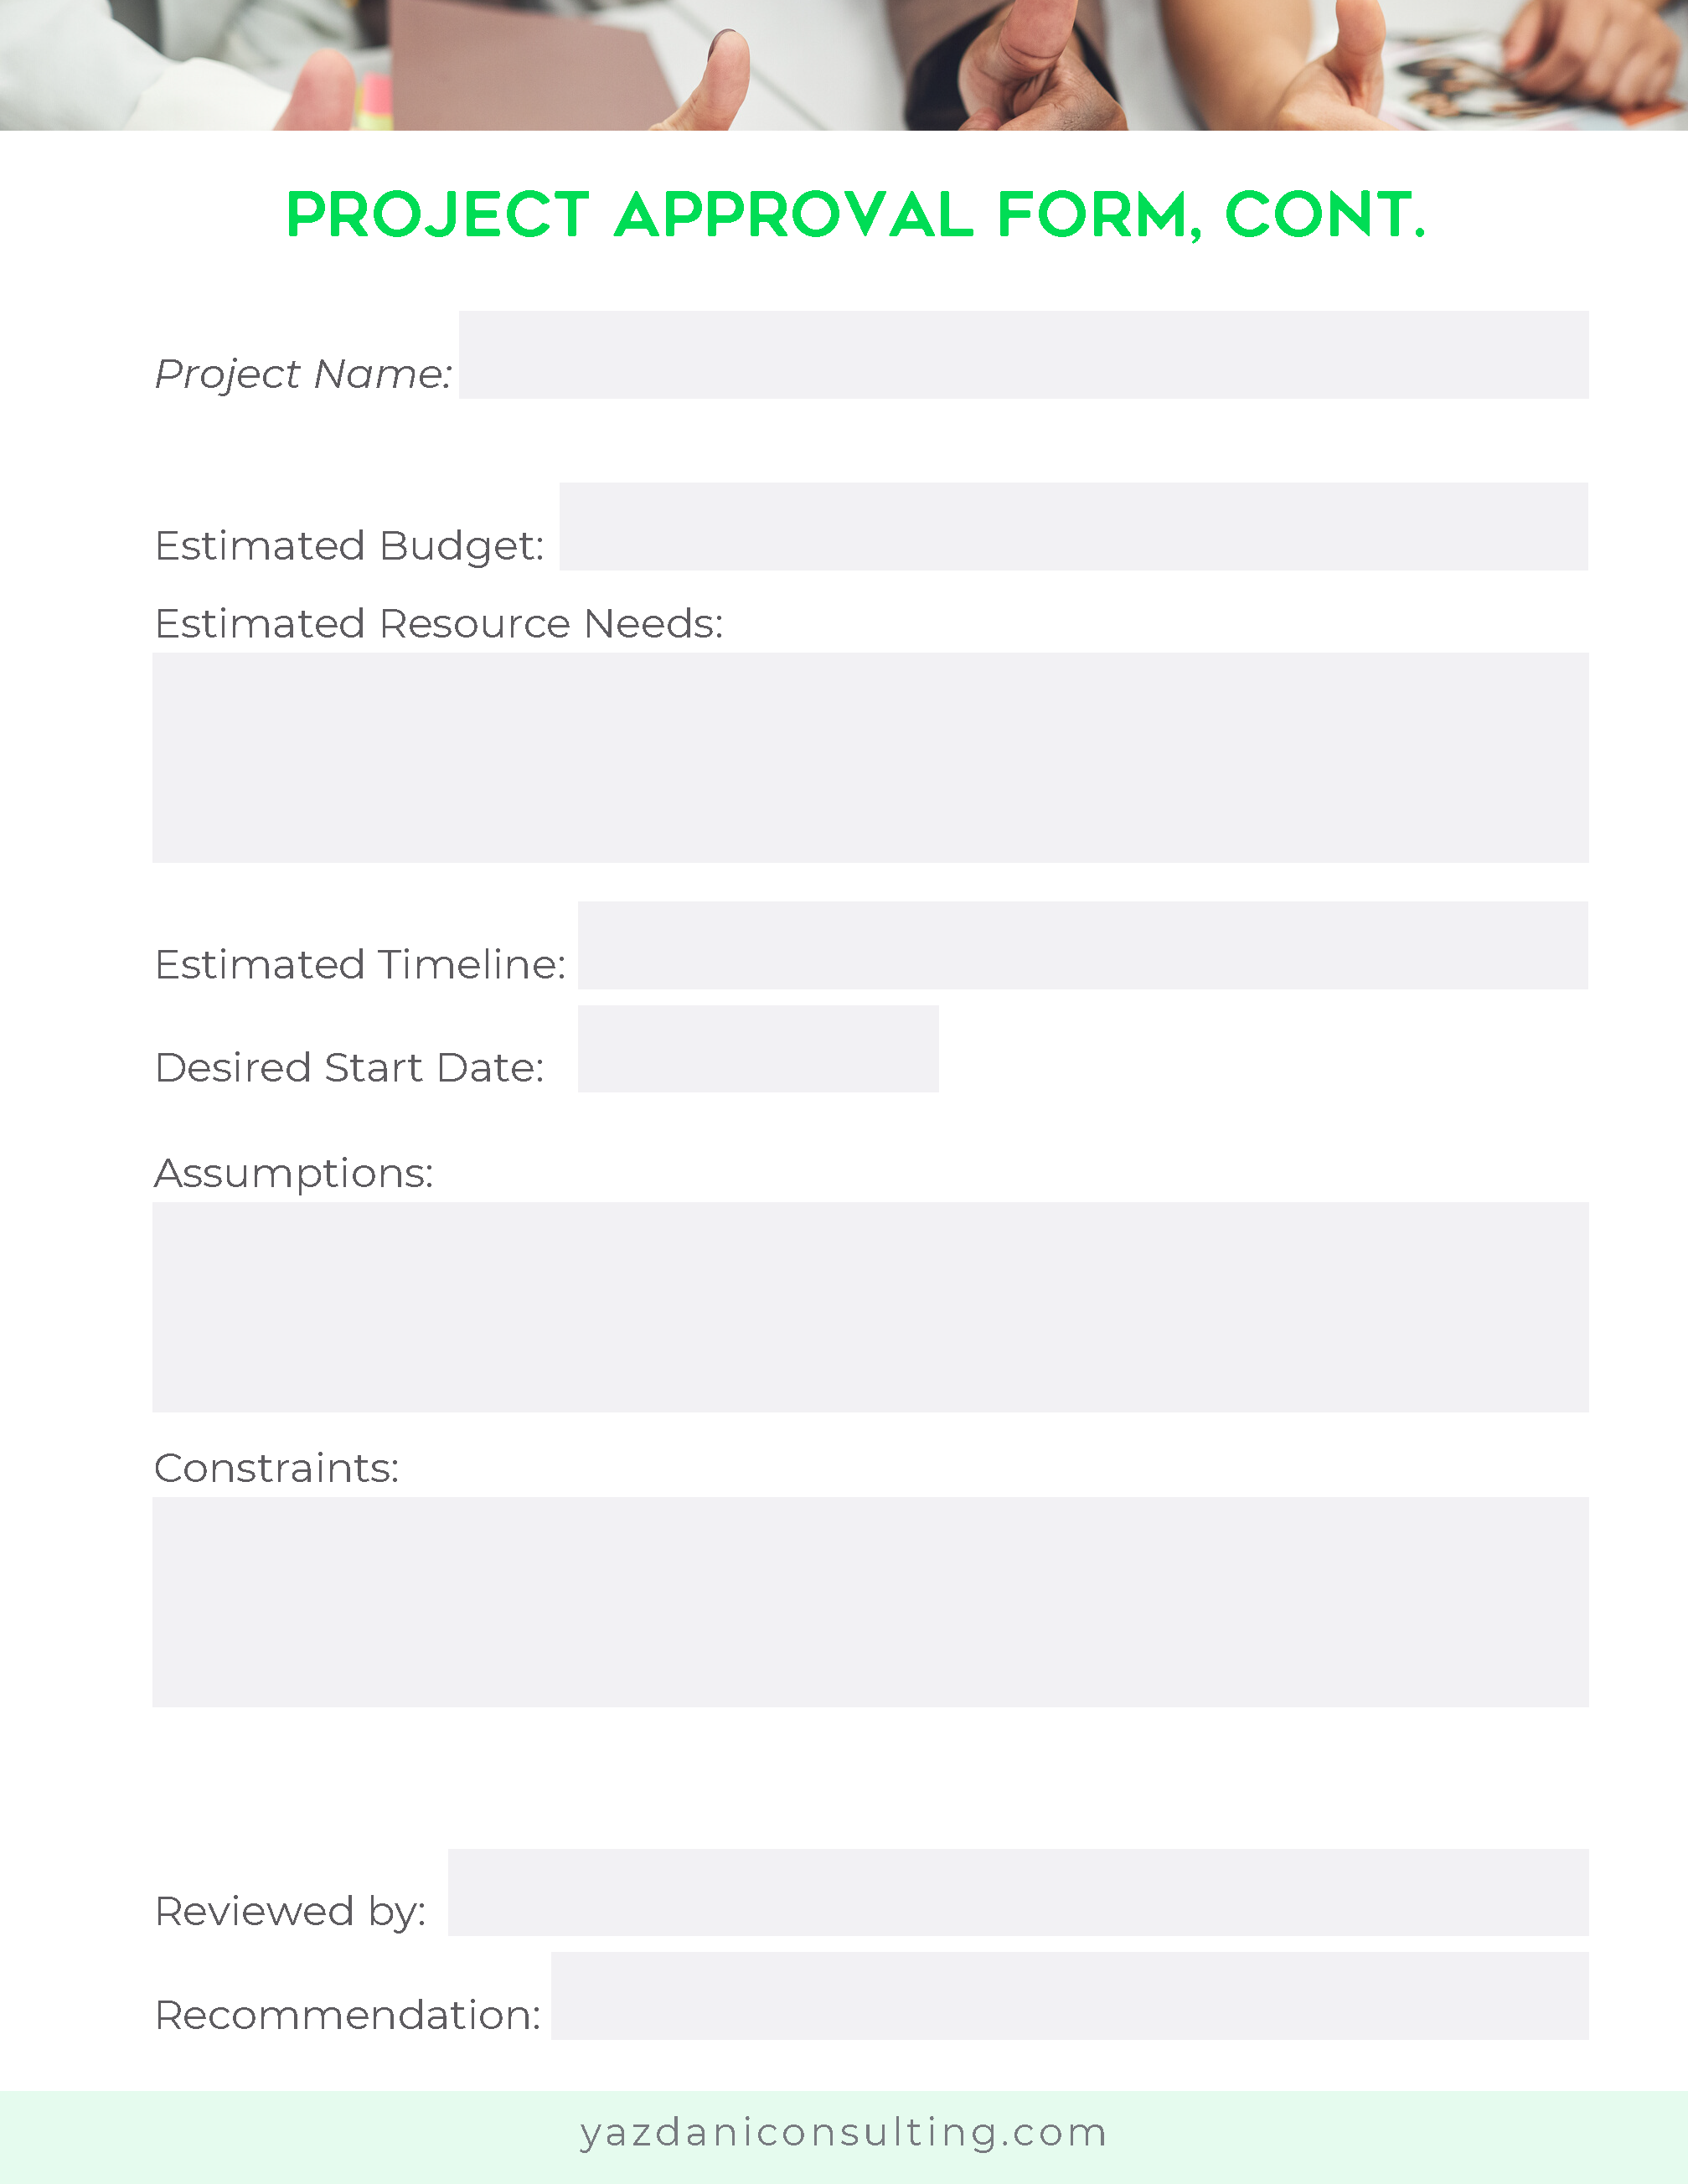 Project Approval Template_Page_3.png